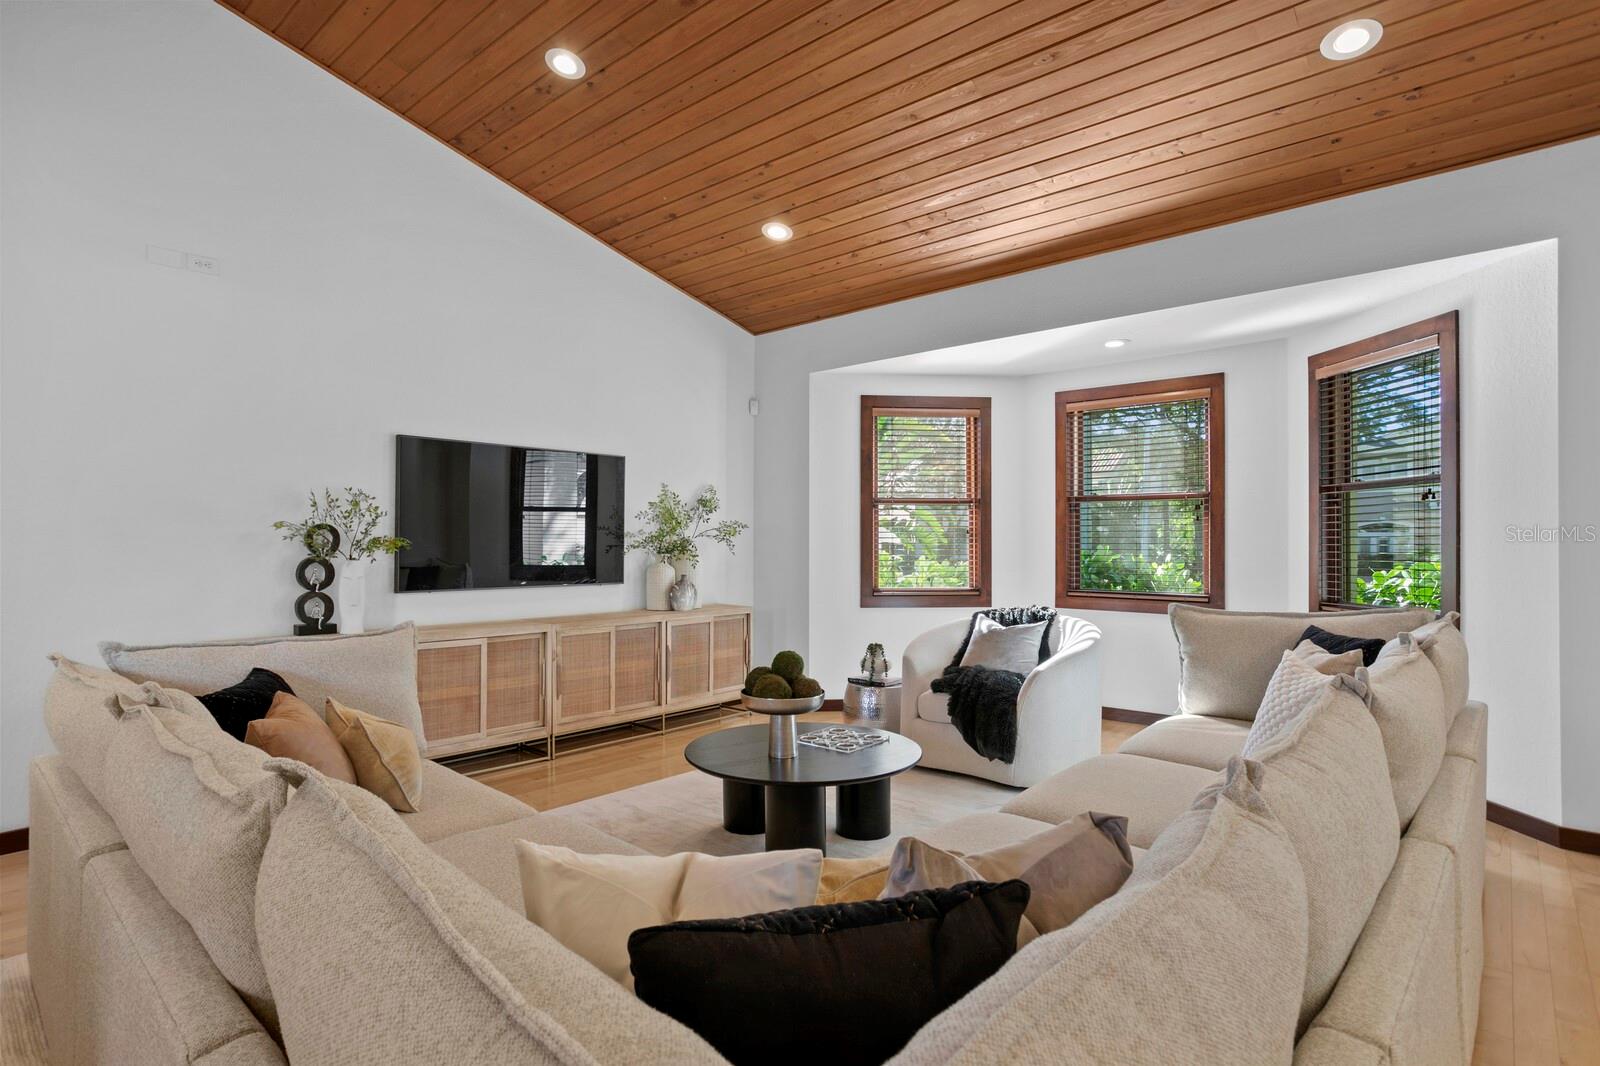 The living room features bay windows and great natural light